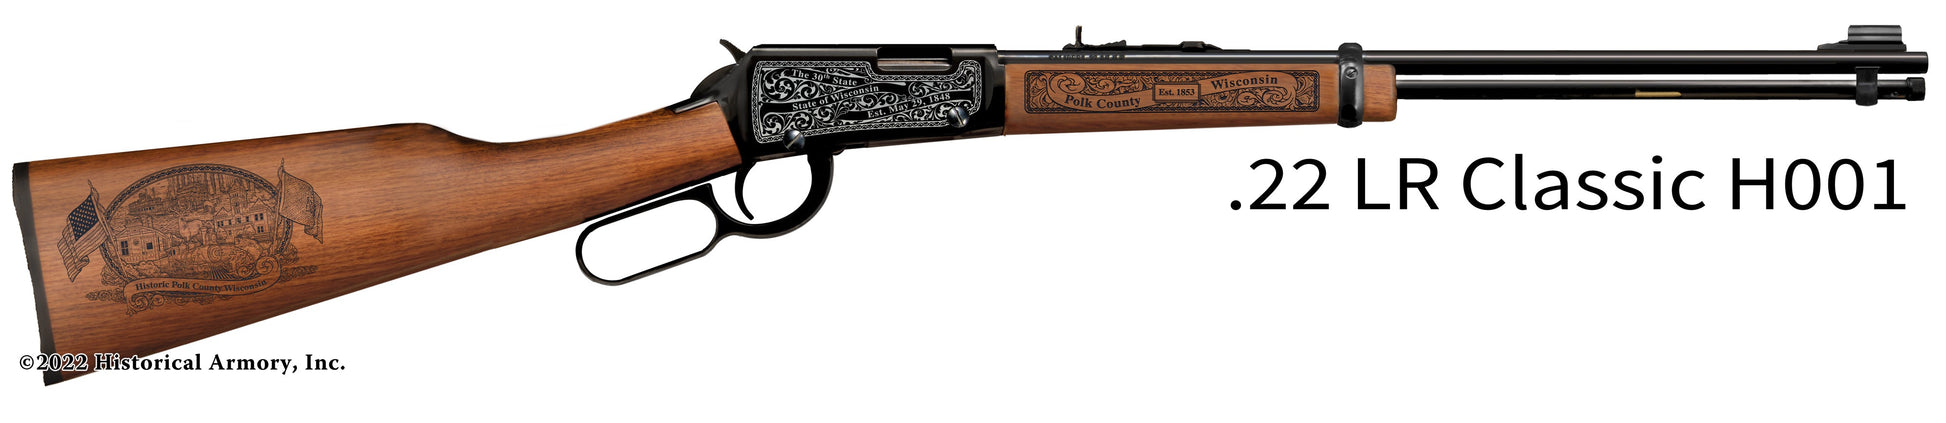 Polk County Wisconsin Engraved Henry H001 Rifle